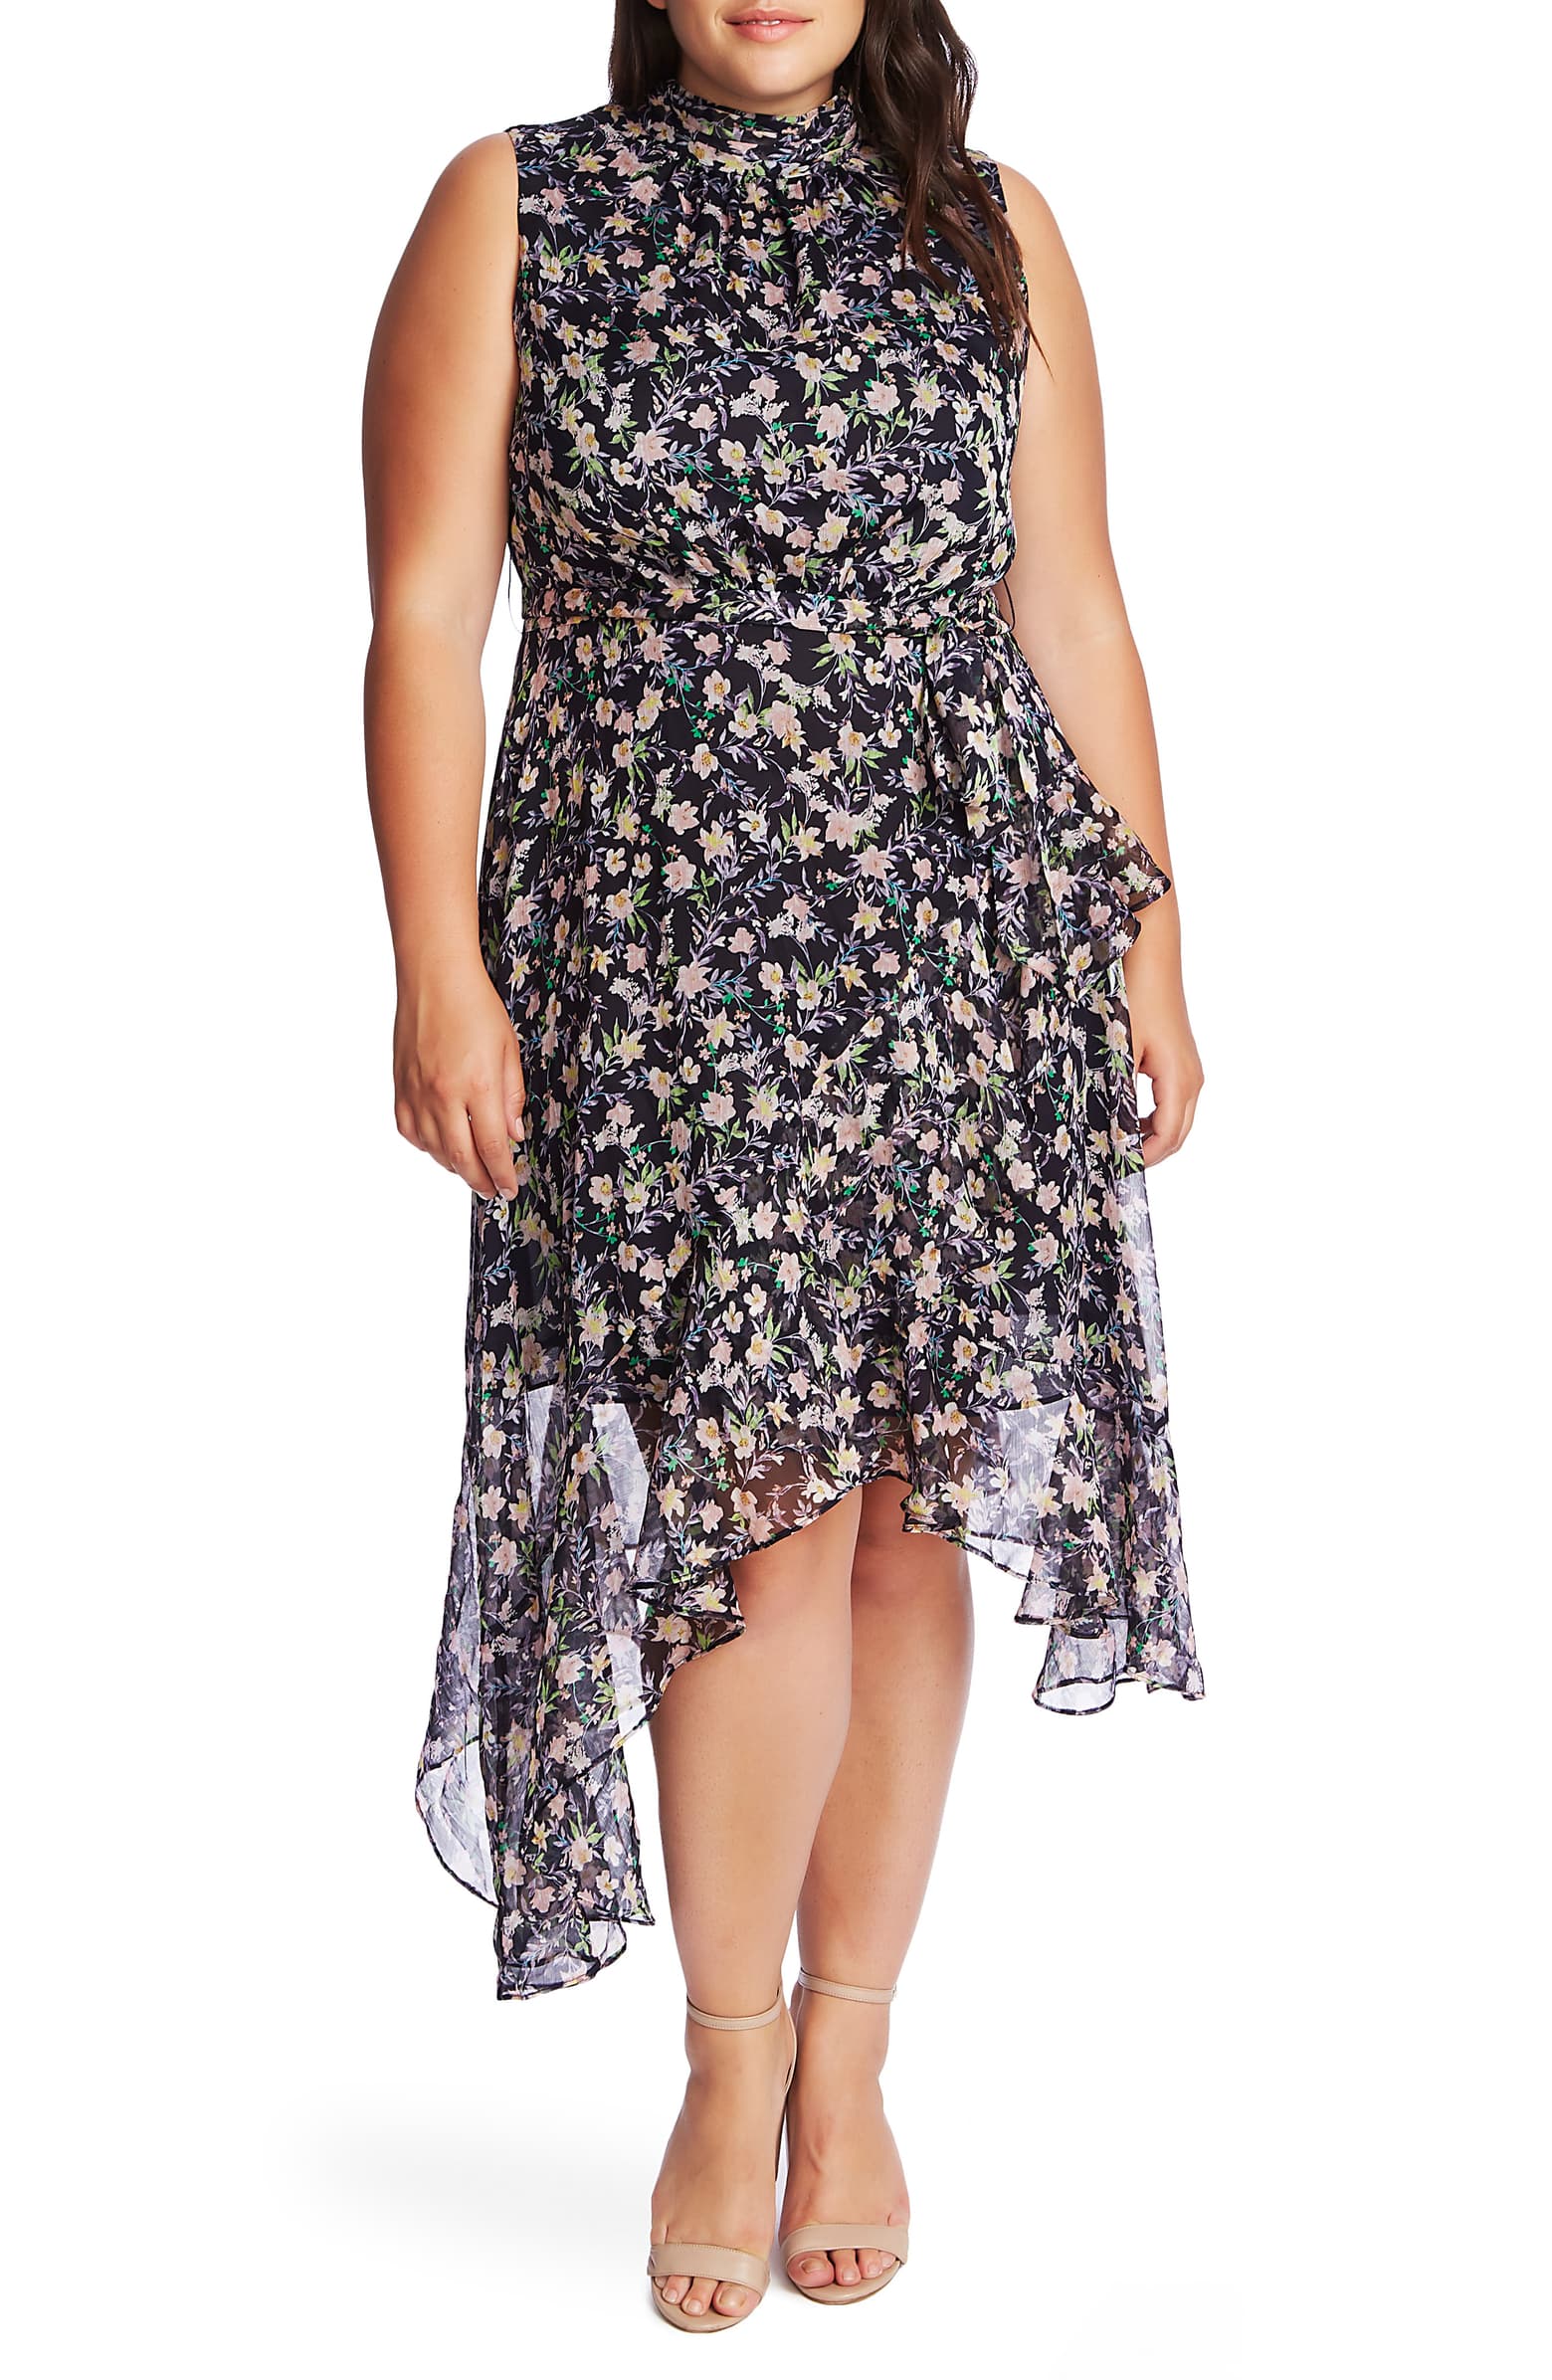 Oh Hey, Curvy Girl! Slay Your Next Wedding Guest Appearance With These ...